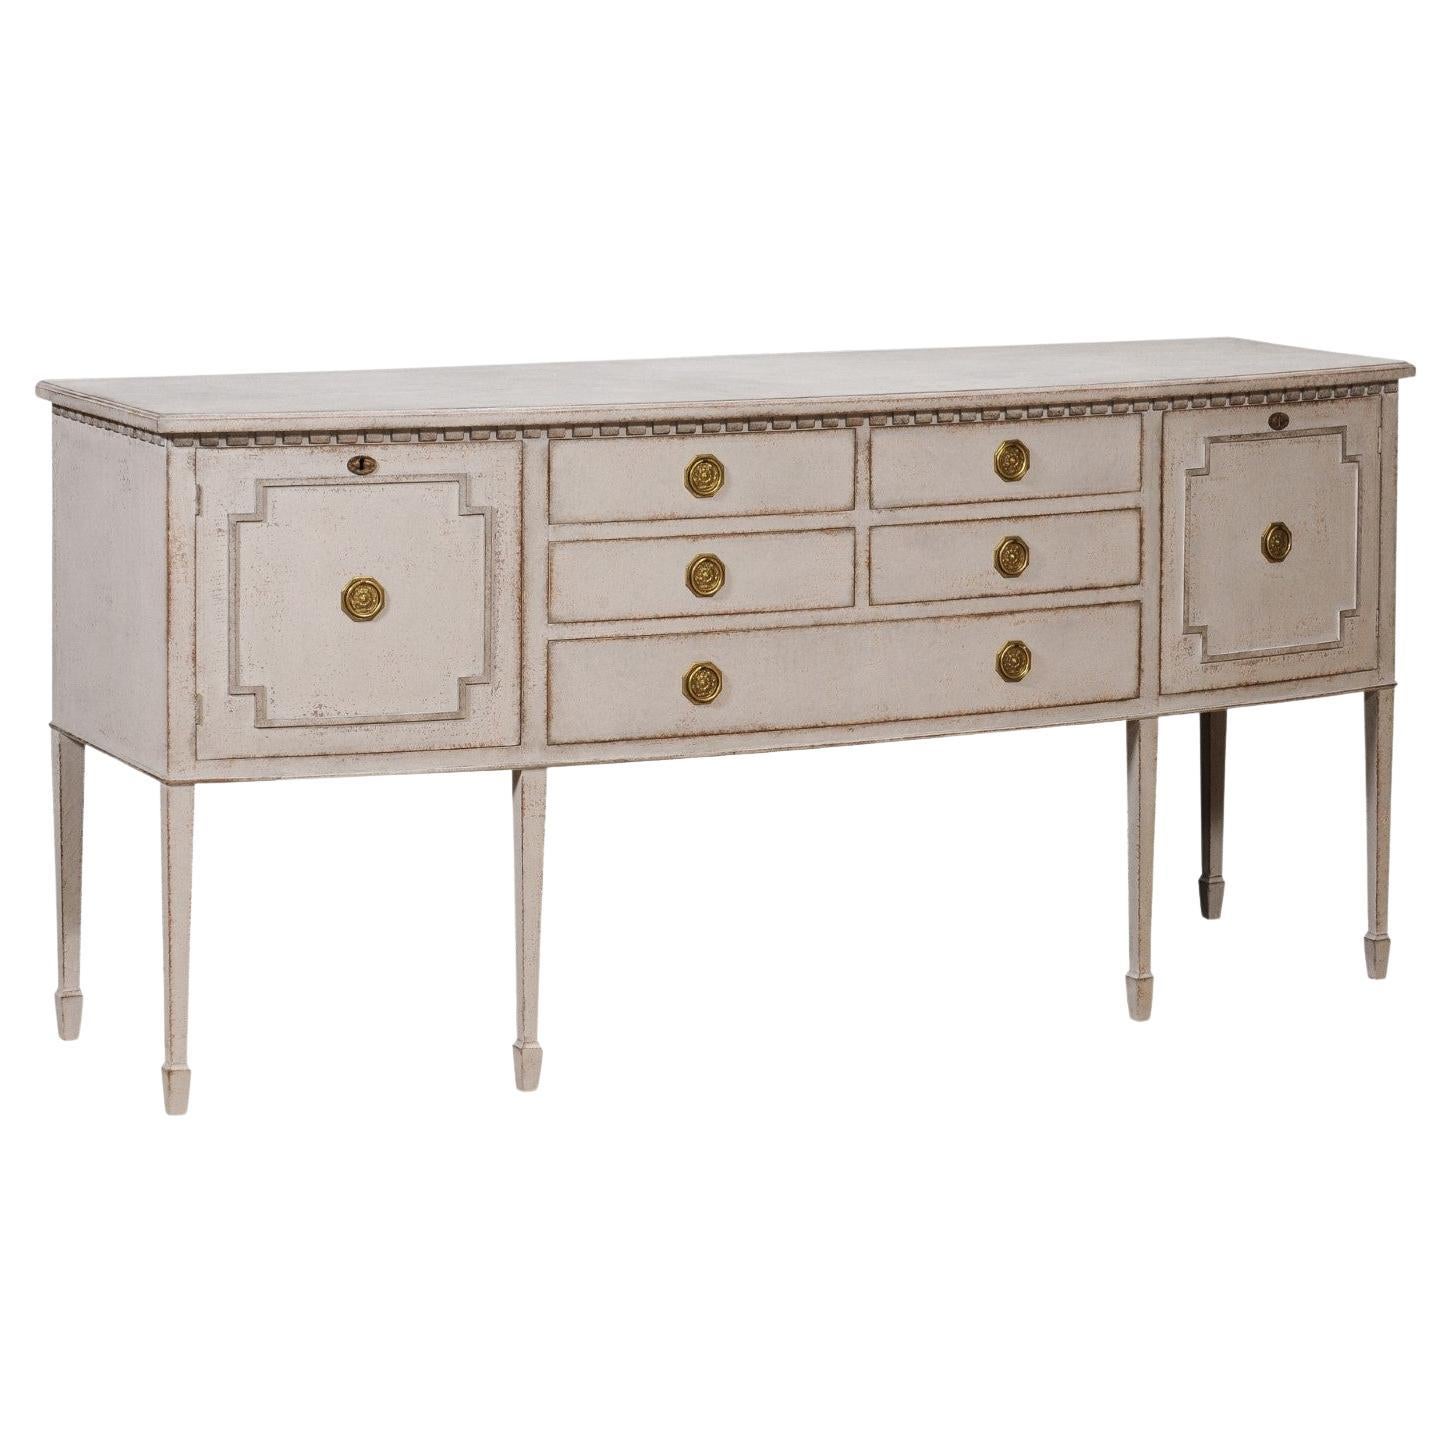 Neoclassical Style Painted Bow Front Sideboard with Two Doors and Five Drawers For Sale